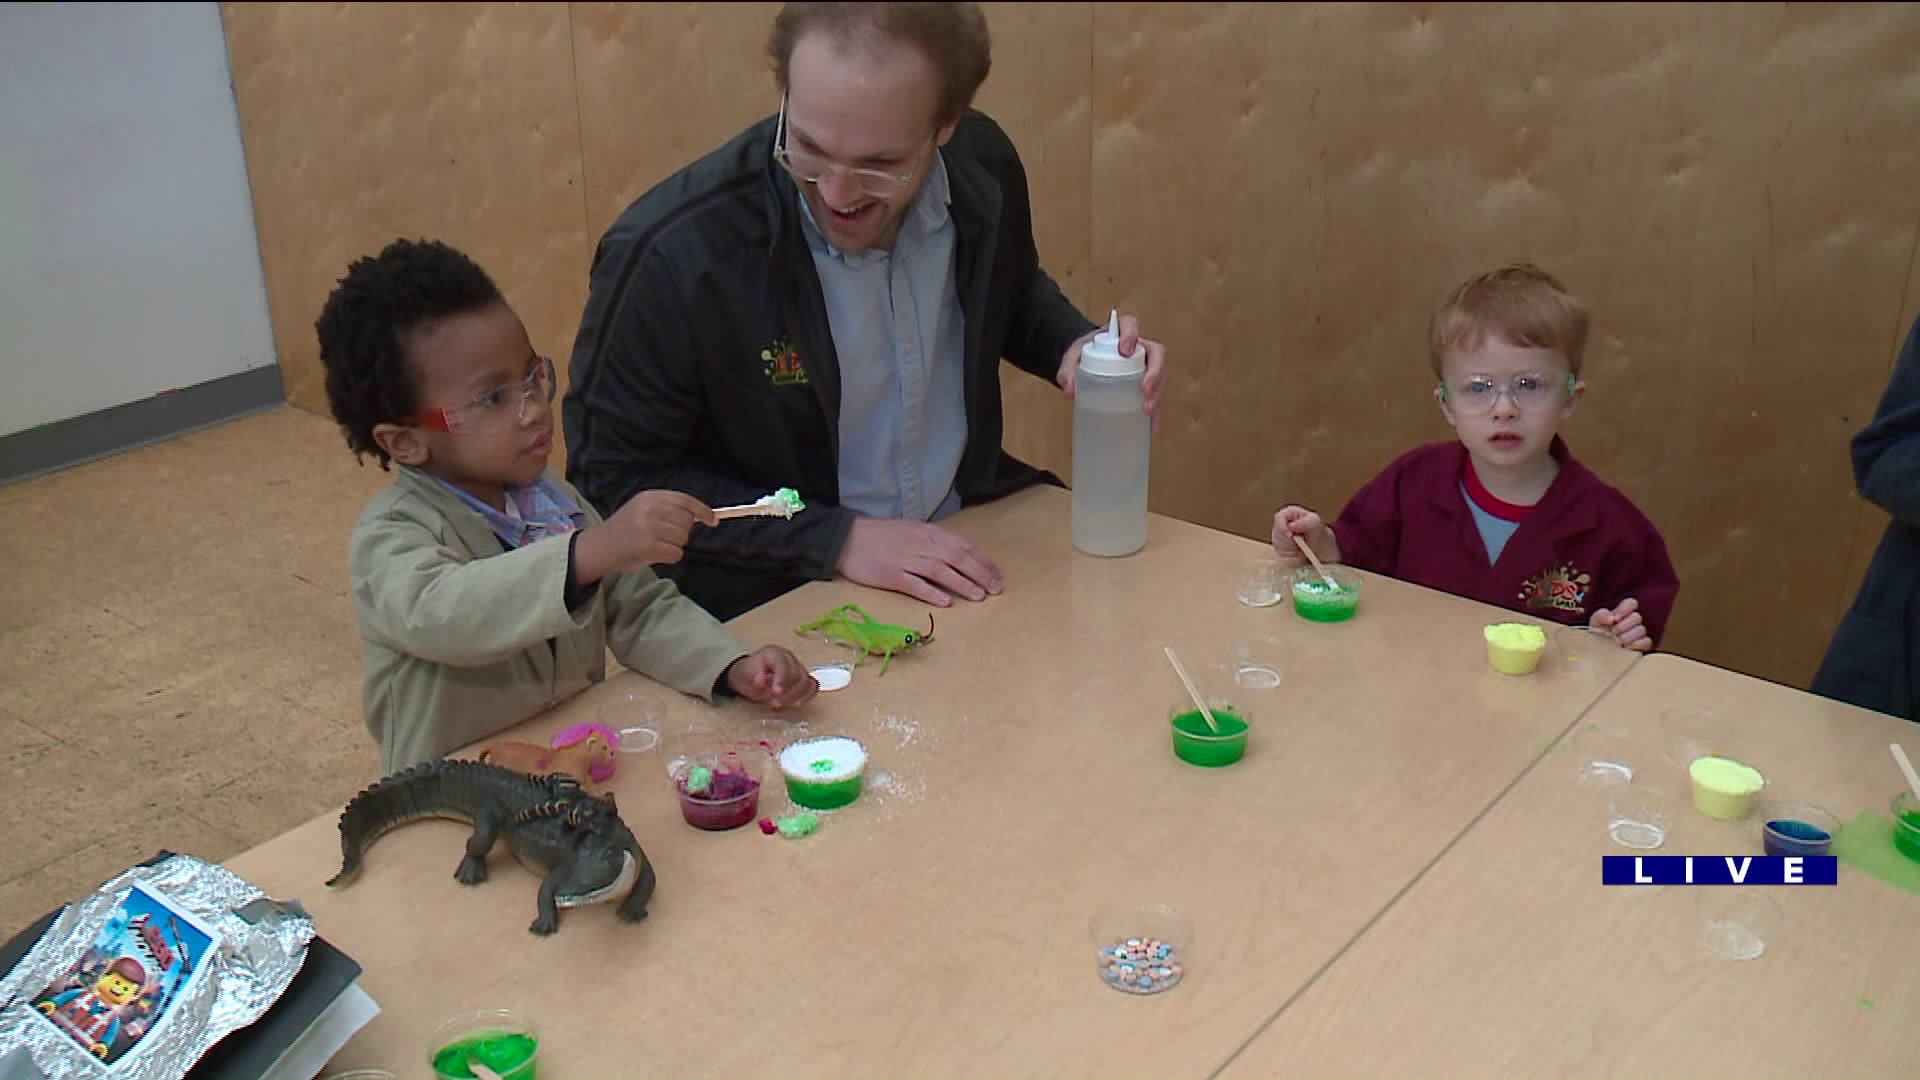 Around Town checks out Kids Science Labs